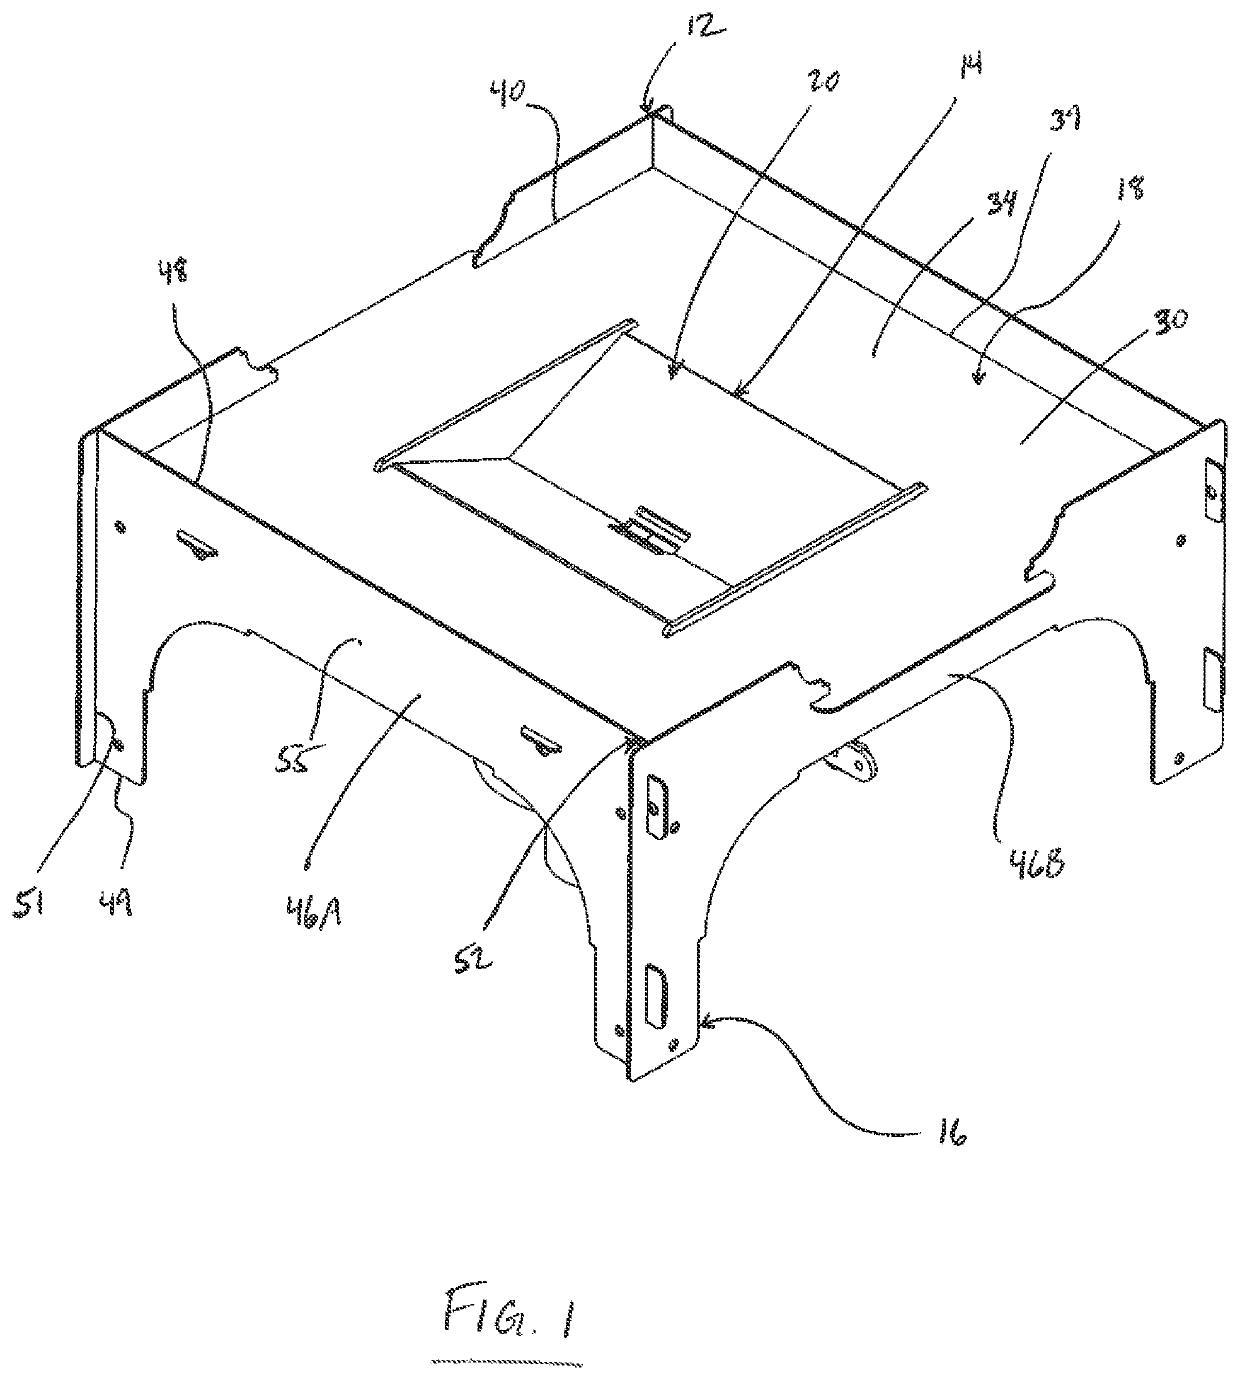 Kit comprising components made from planar sheet material for forming forge table and forge pot, and valve component for selectively communicating airflow source and forge pot